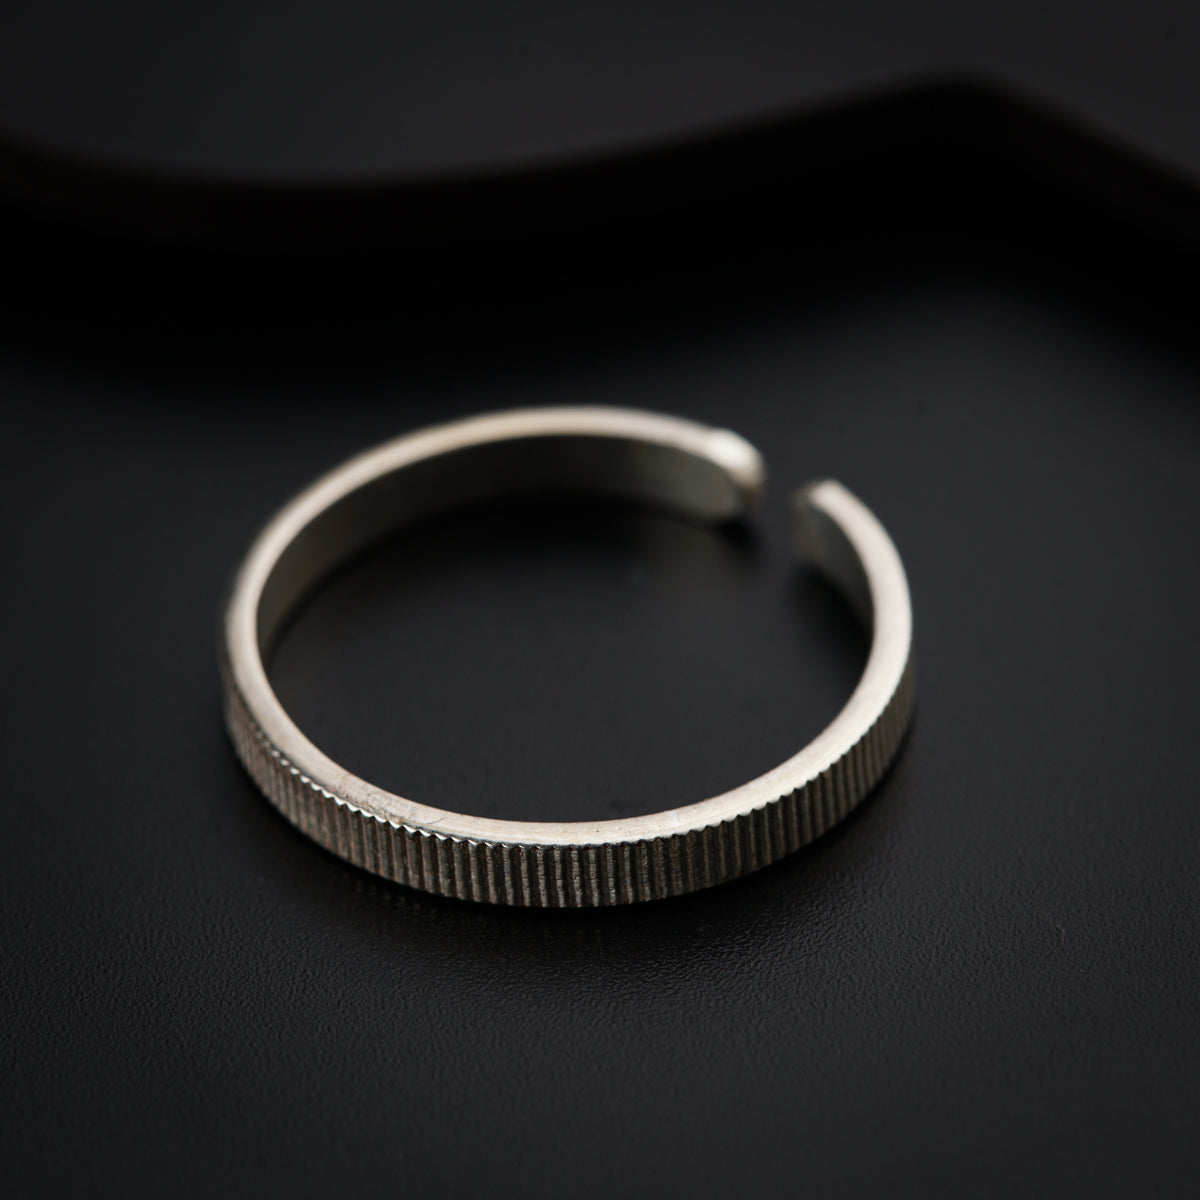 Textured ( Lines ) Couple Ring / Bands